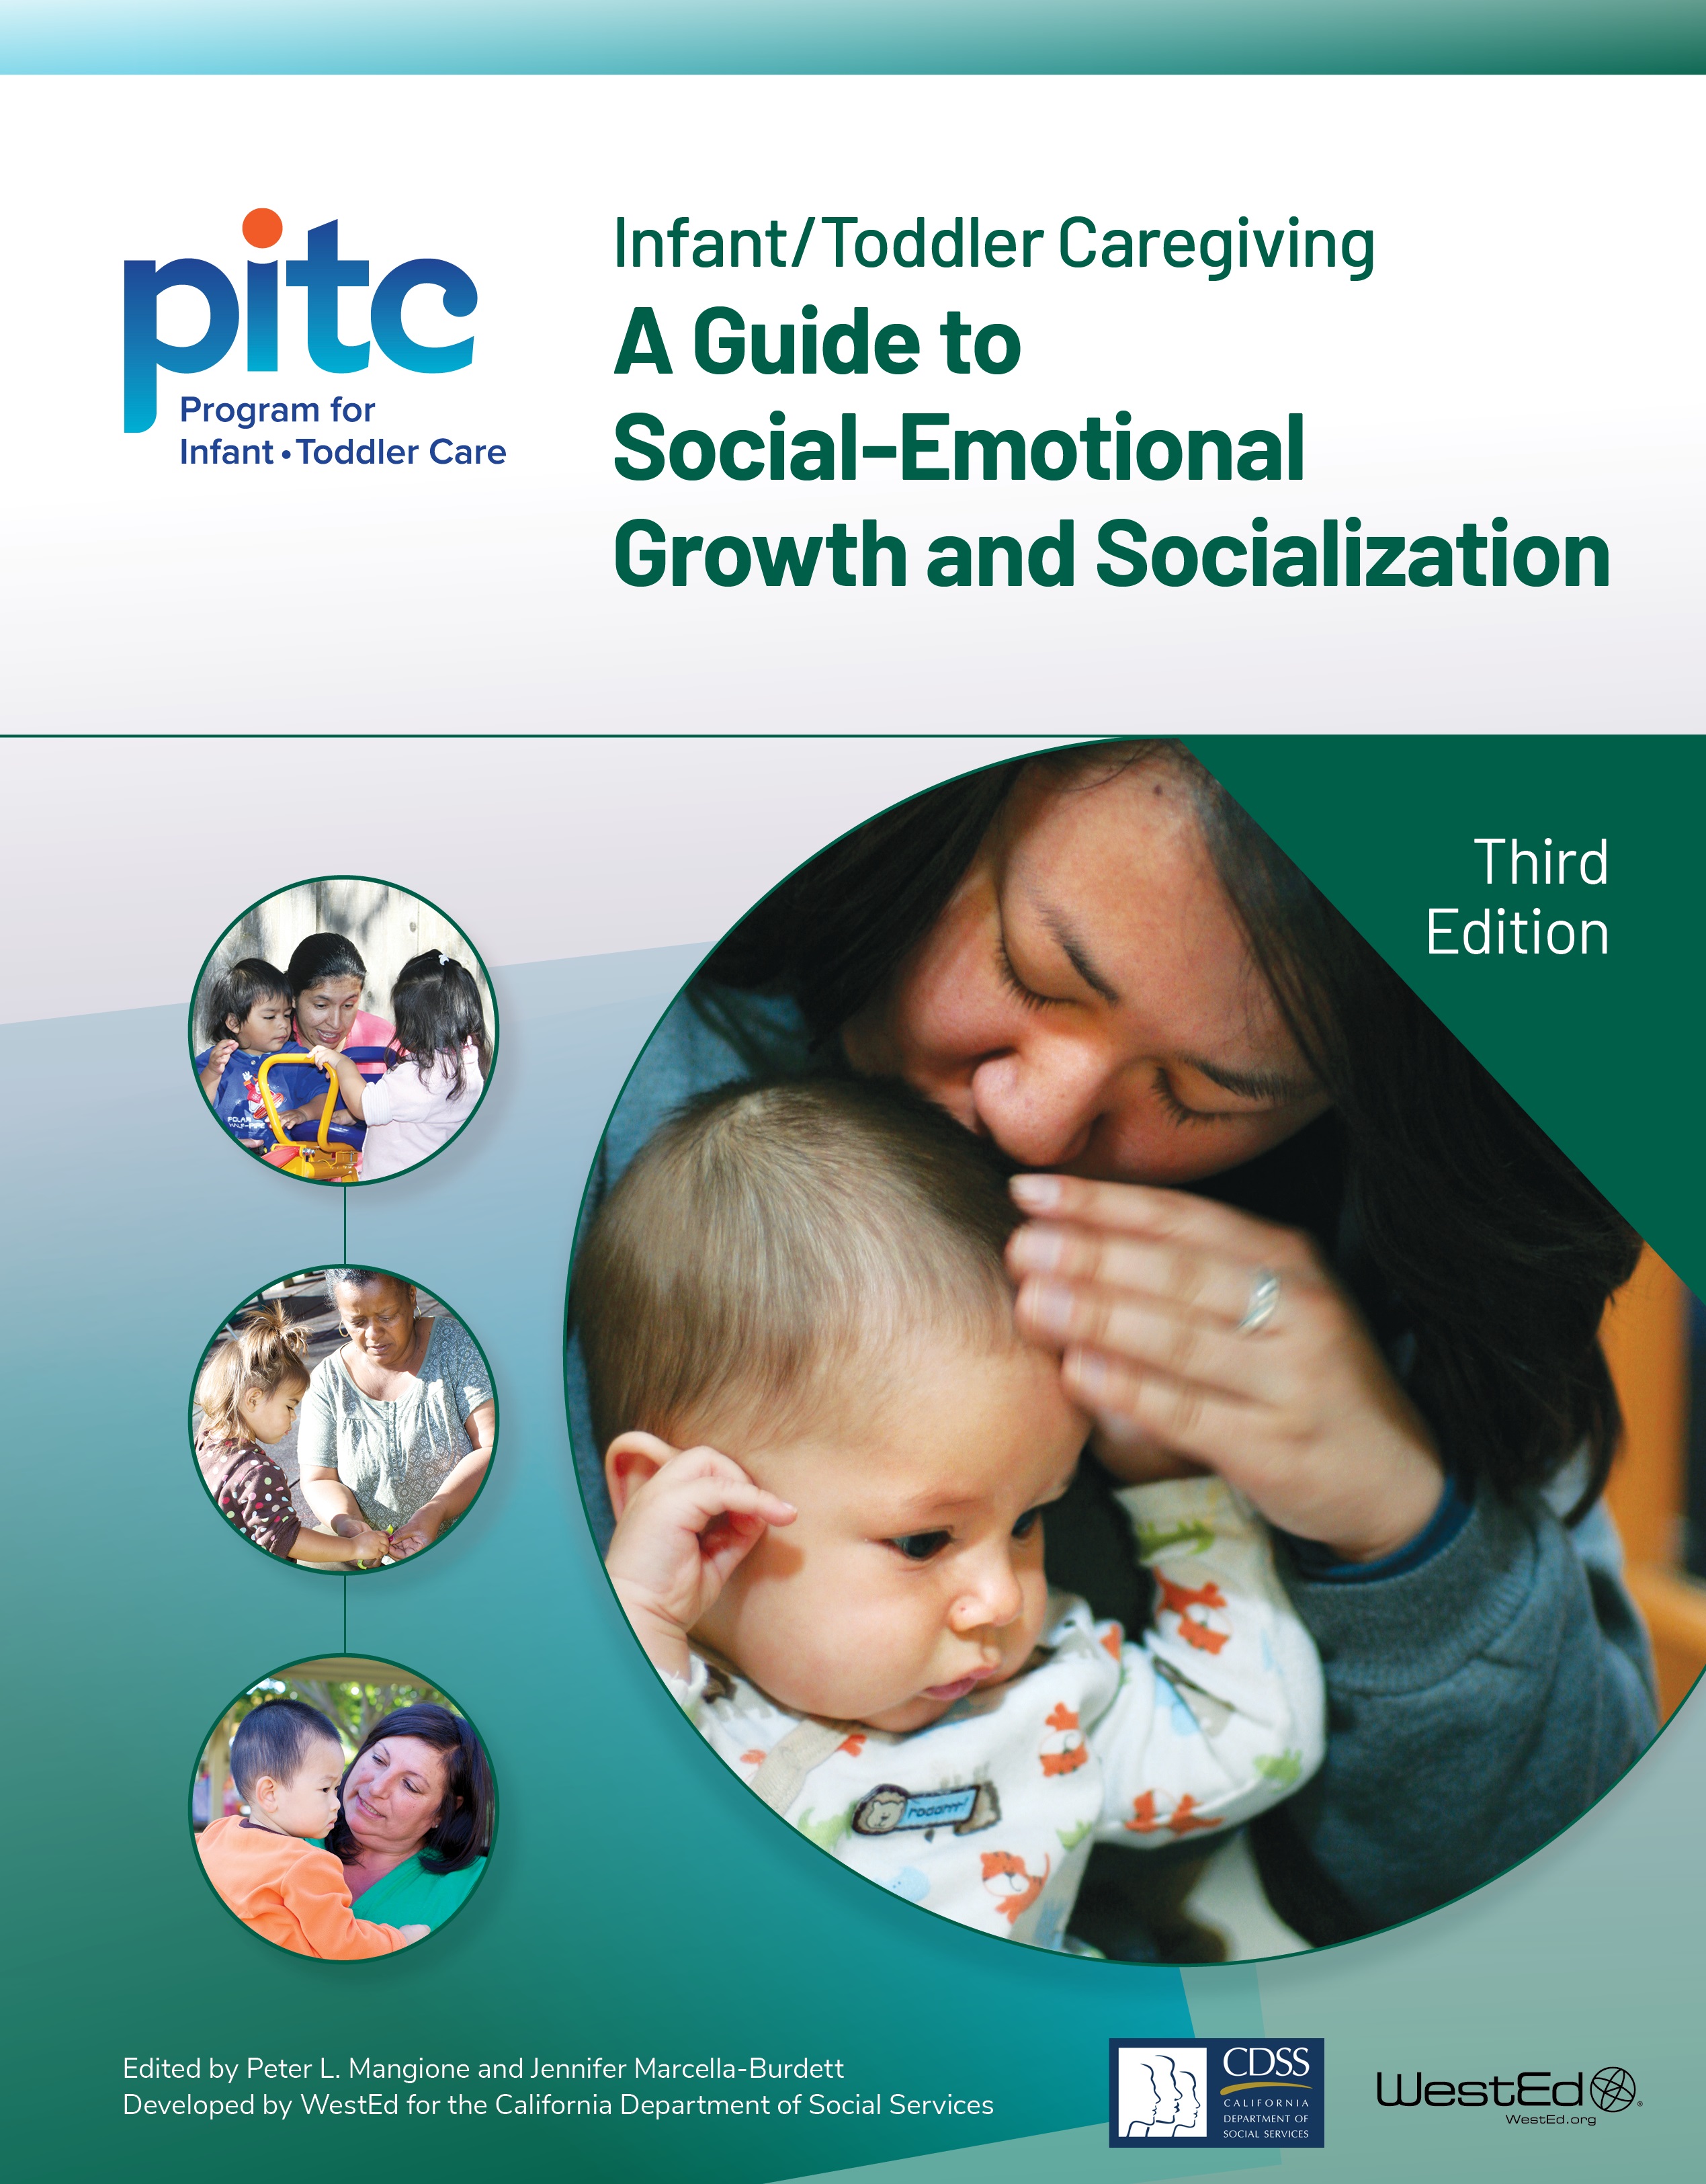 The cover of the Infant/Toddler Caregiving: A Guide to Social-Emotional Growth and Socialization, Third Edition publication